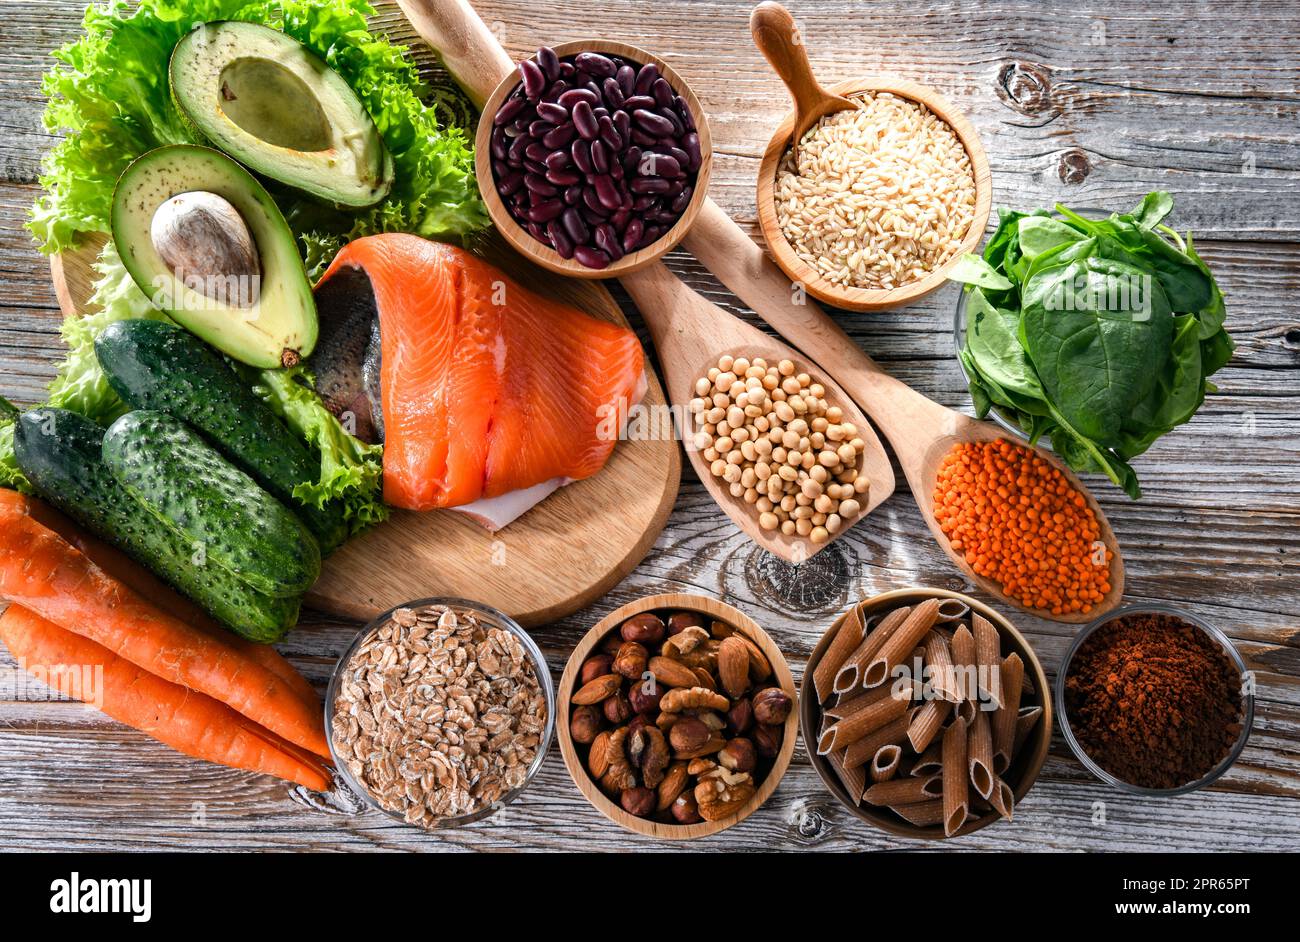 Foods recommended for stabilizing insulin and blood sugar levels Stock Photo